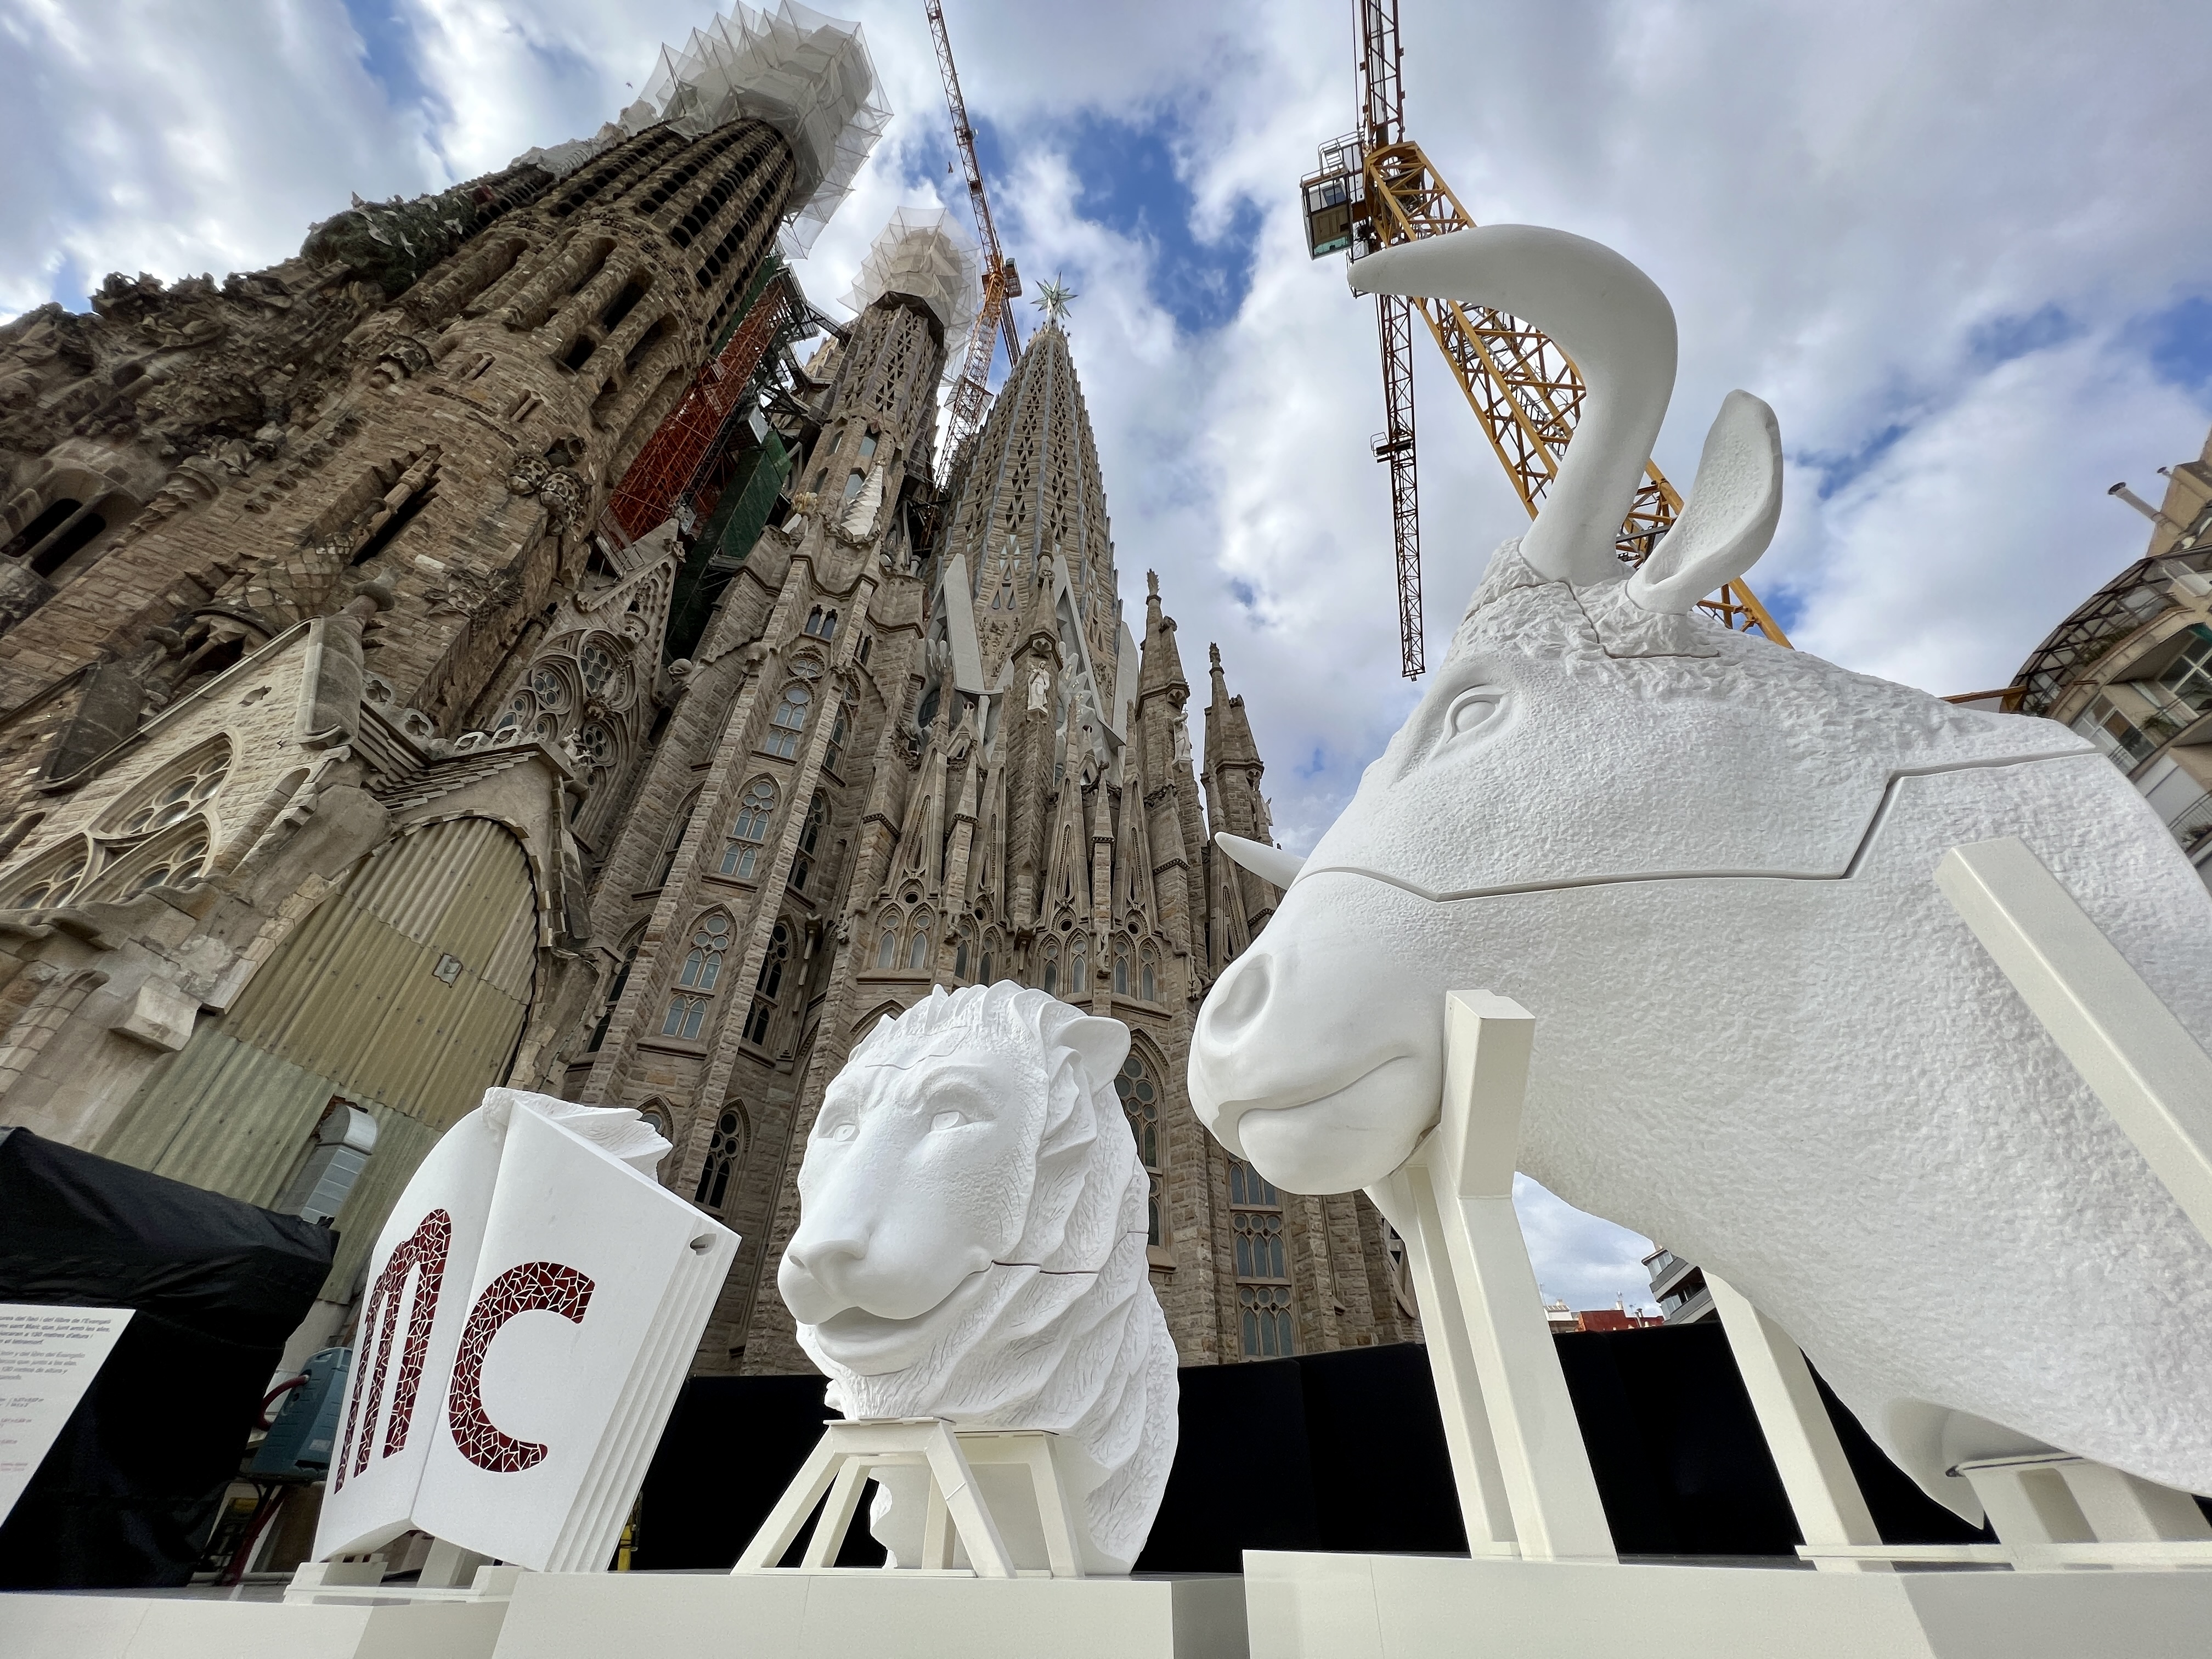 The bull and the lion representing Mark and Luke the Evangelists that will be placed on top of two towers of the Sagrada Família